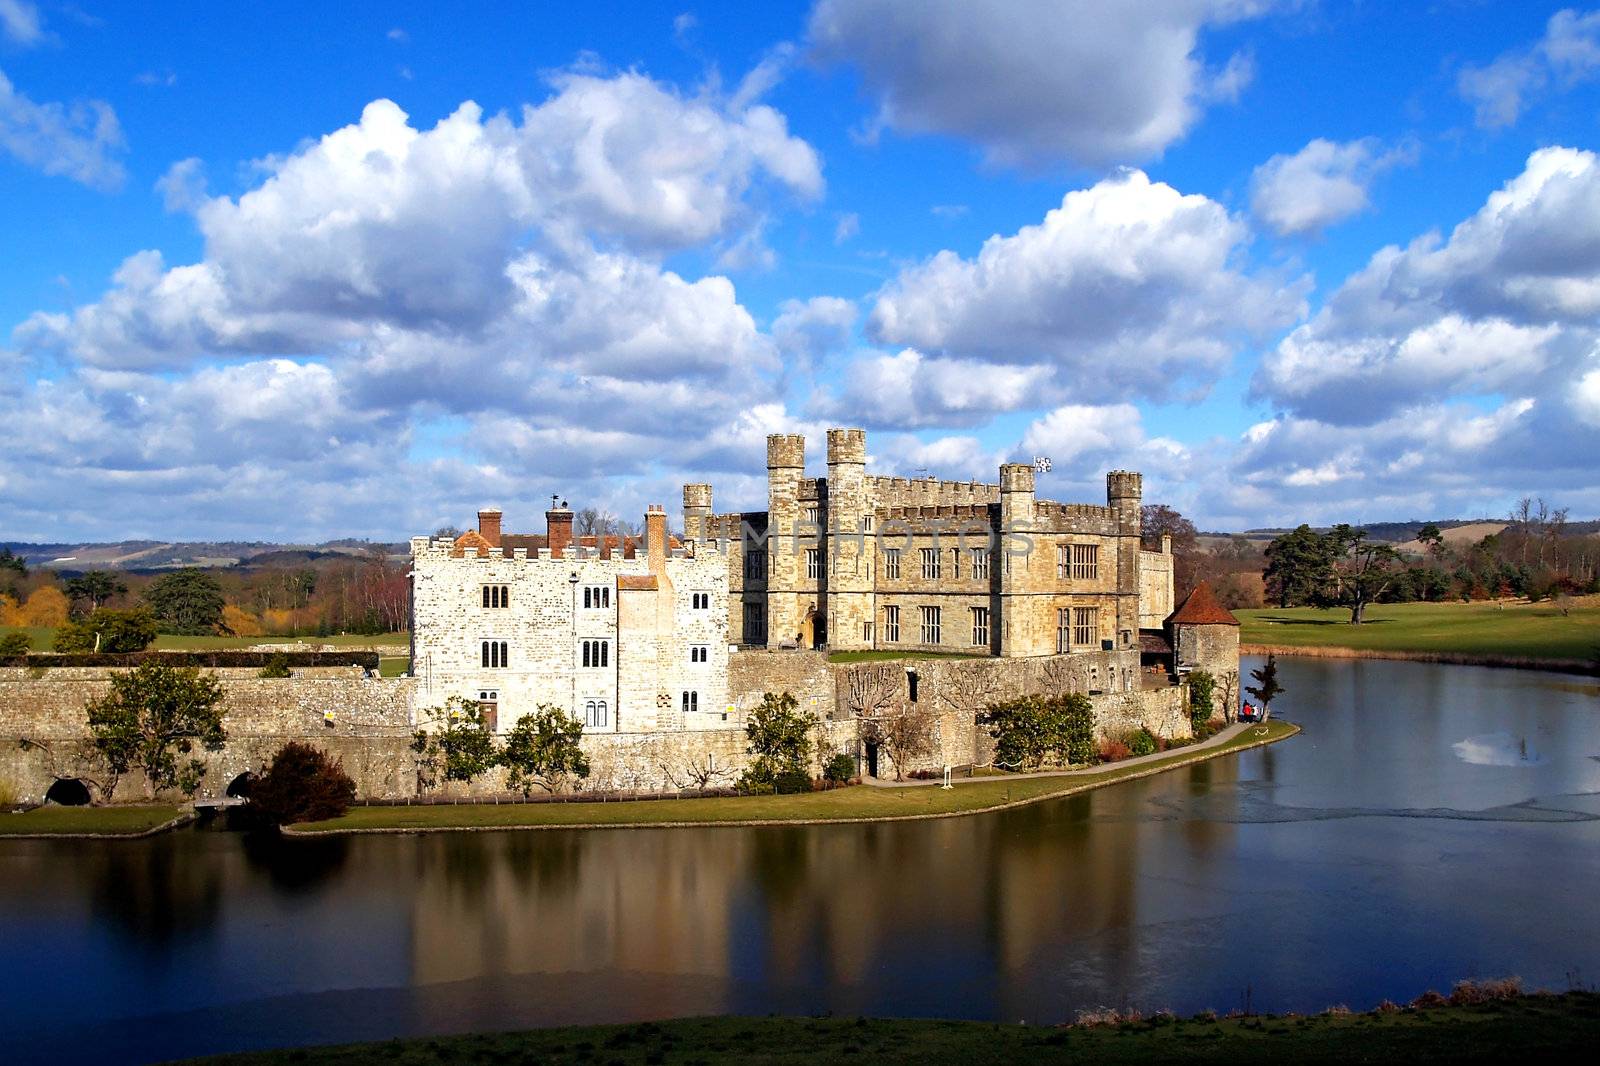 The leeds castle by gary718